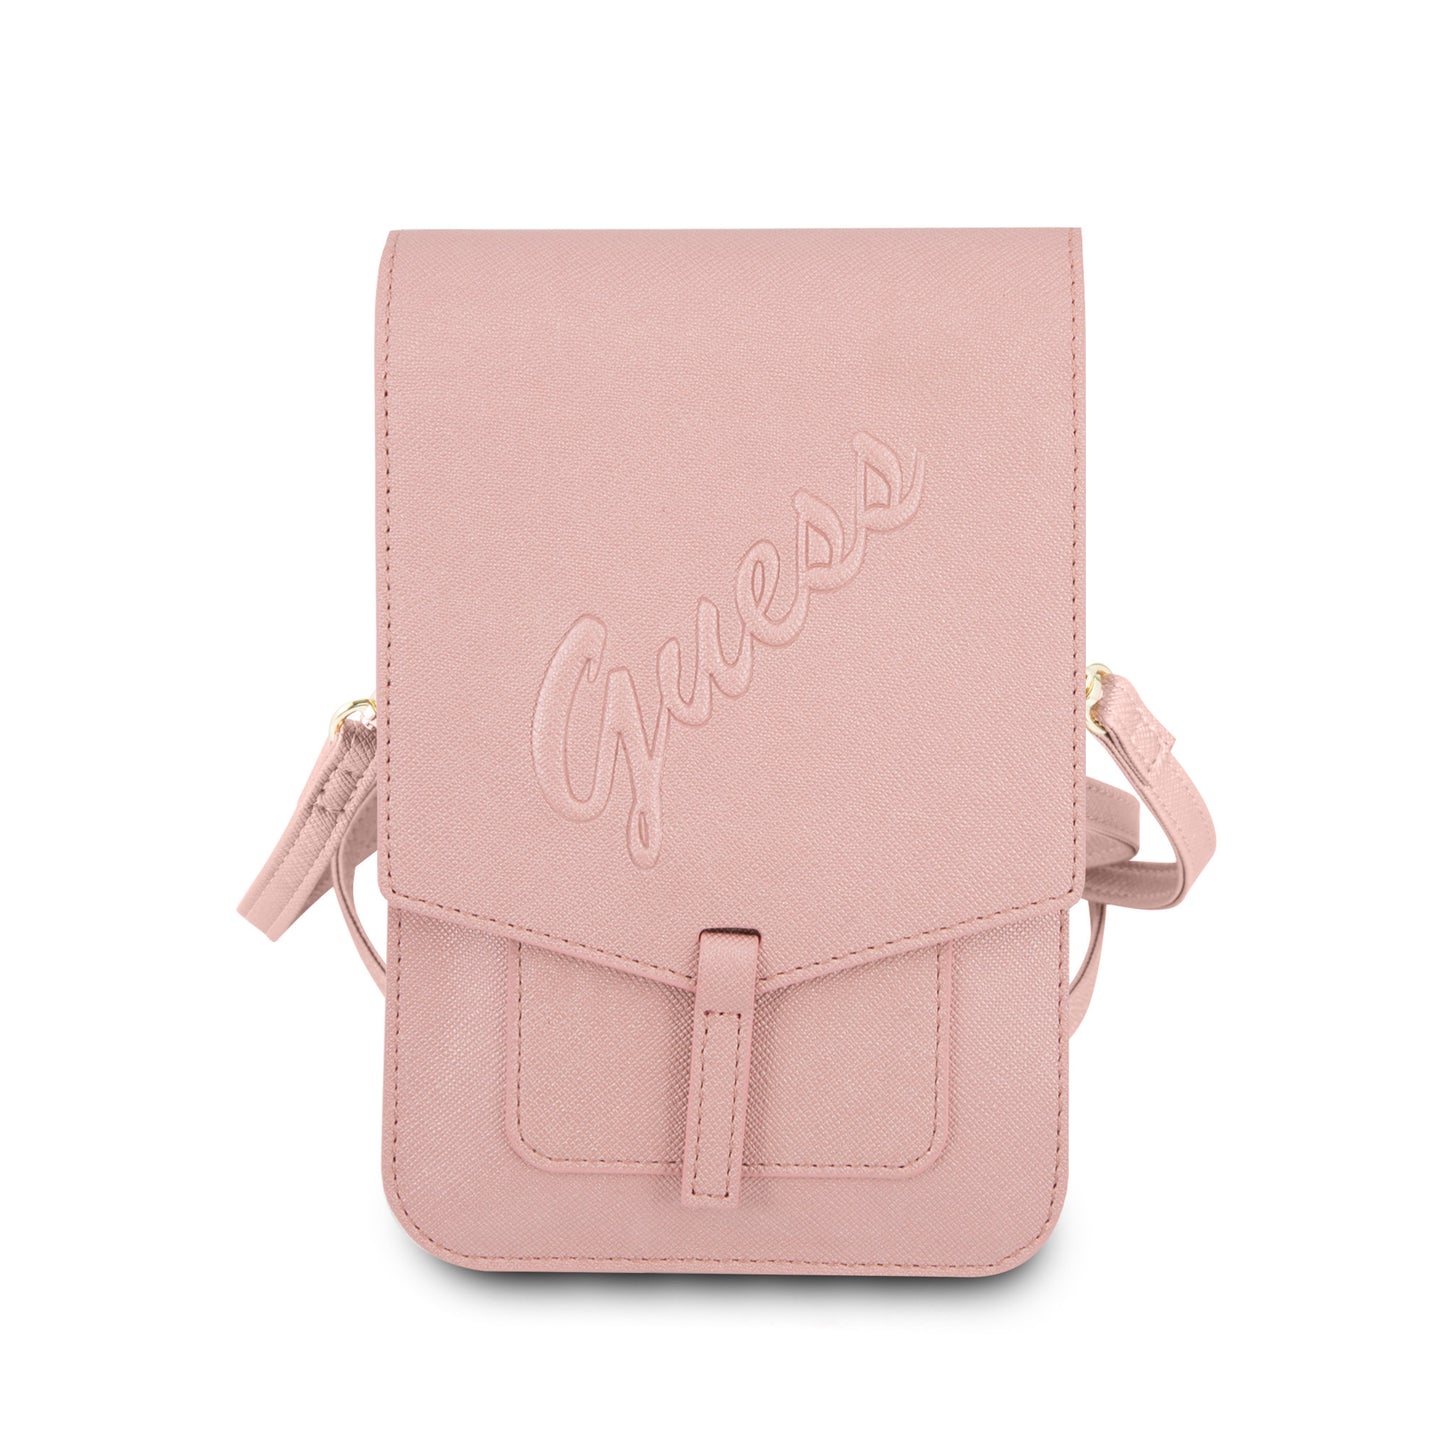 Guess 7 inch PU Leather Heuptas - Wallet bag - Roze